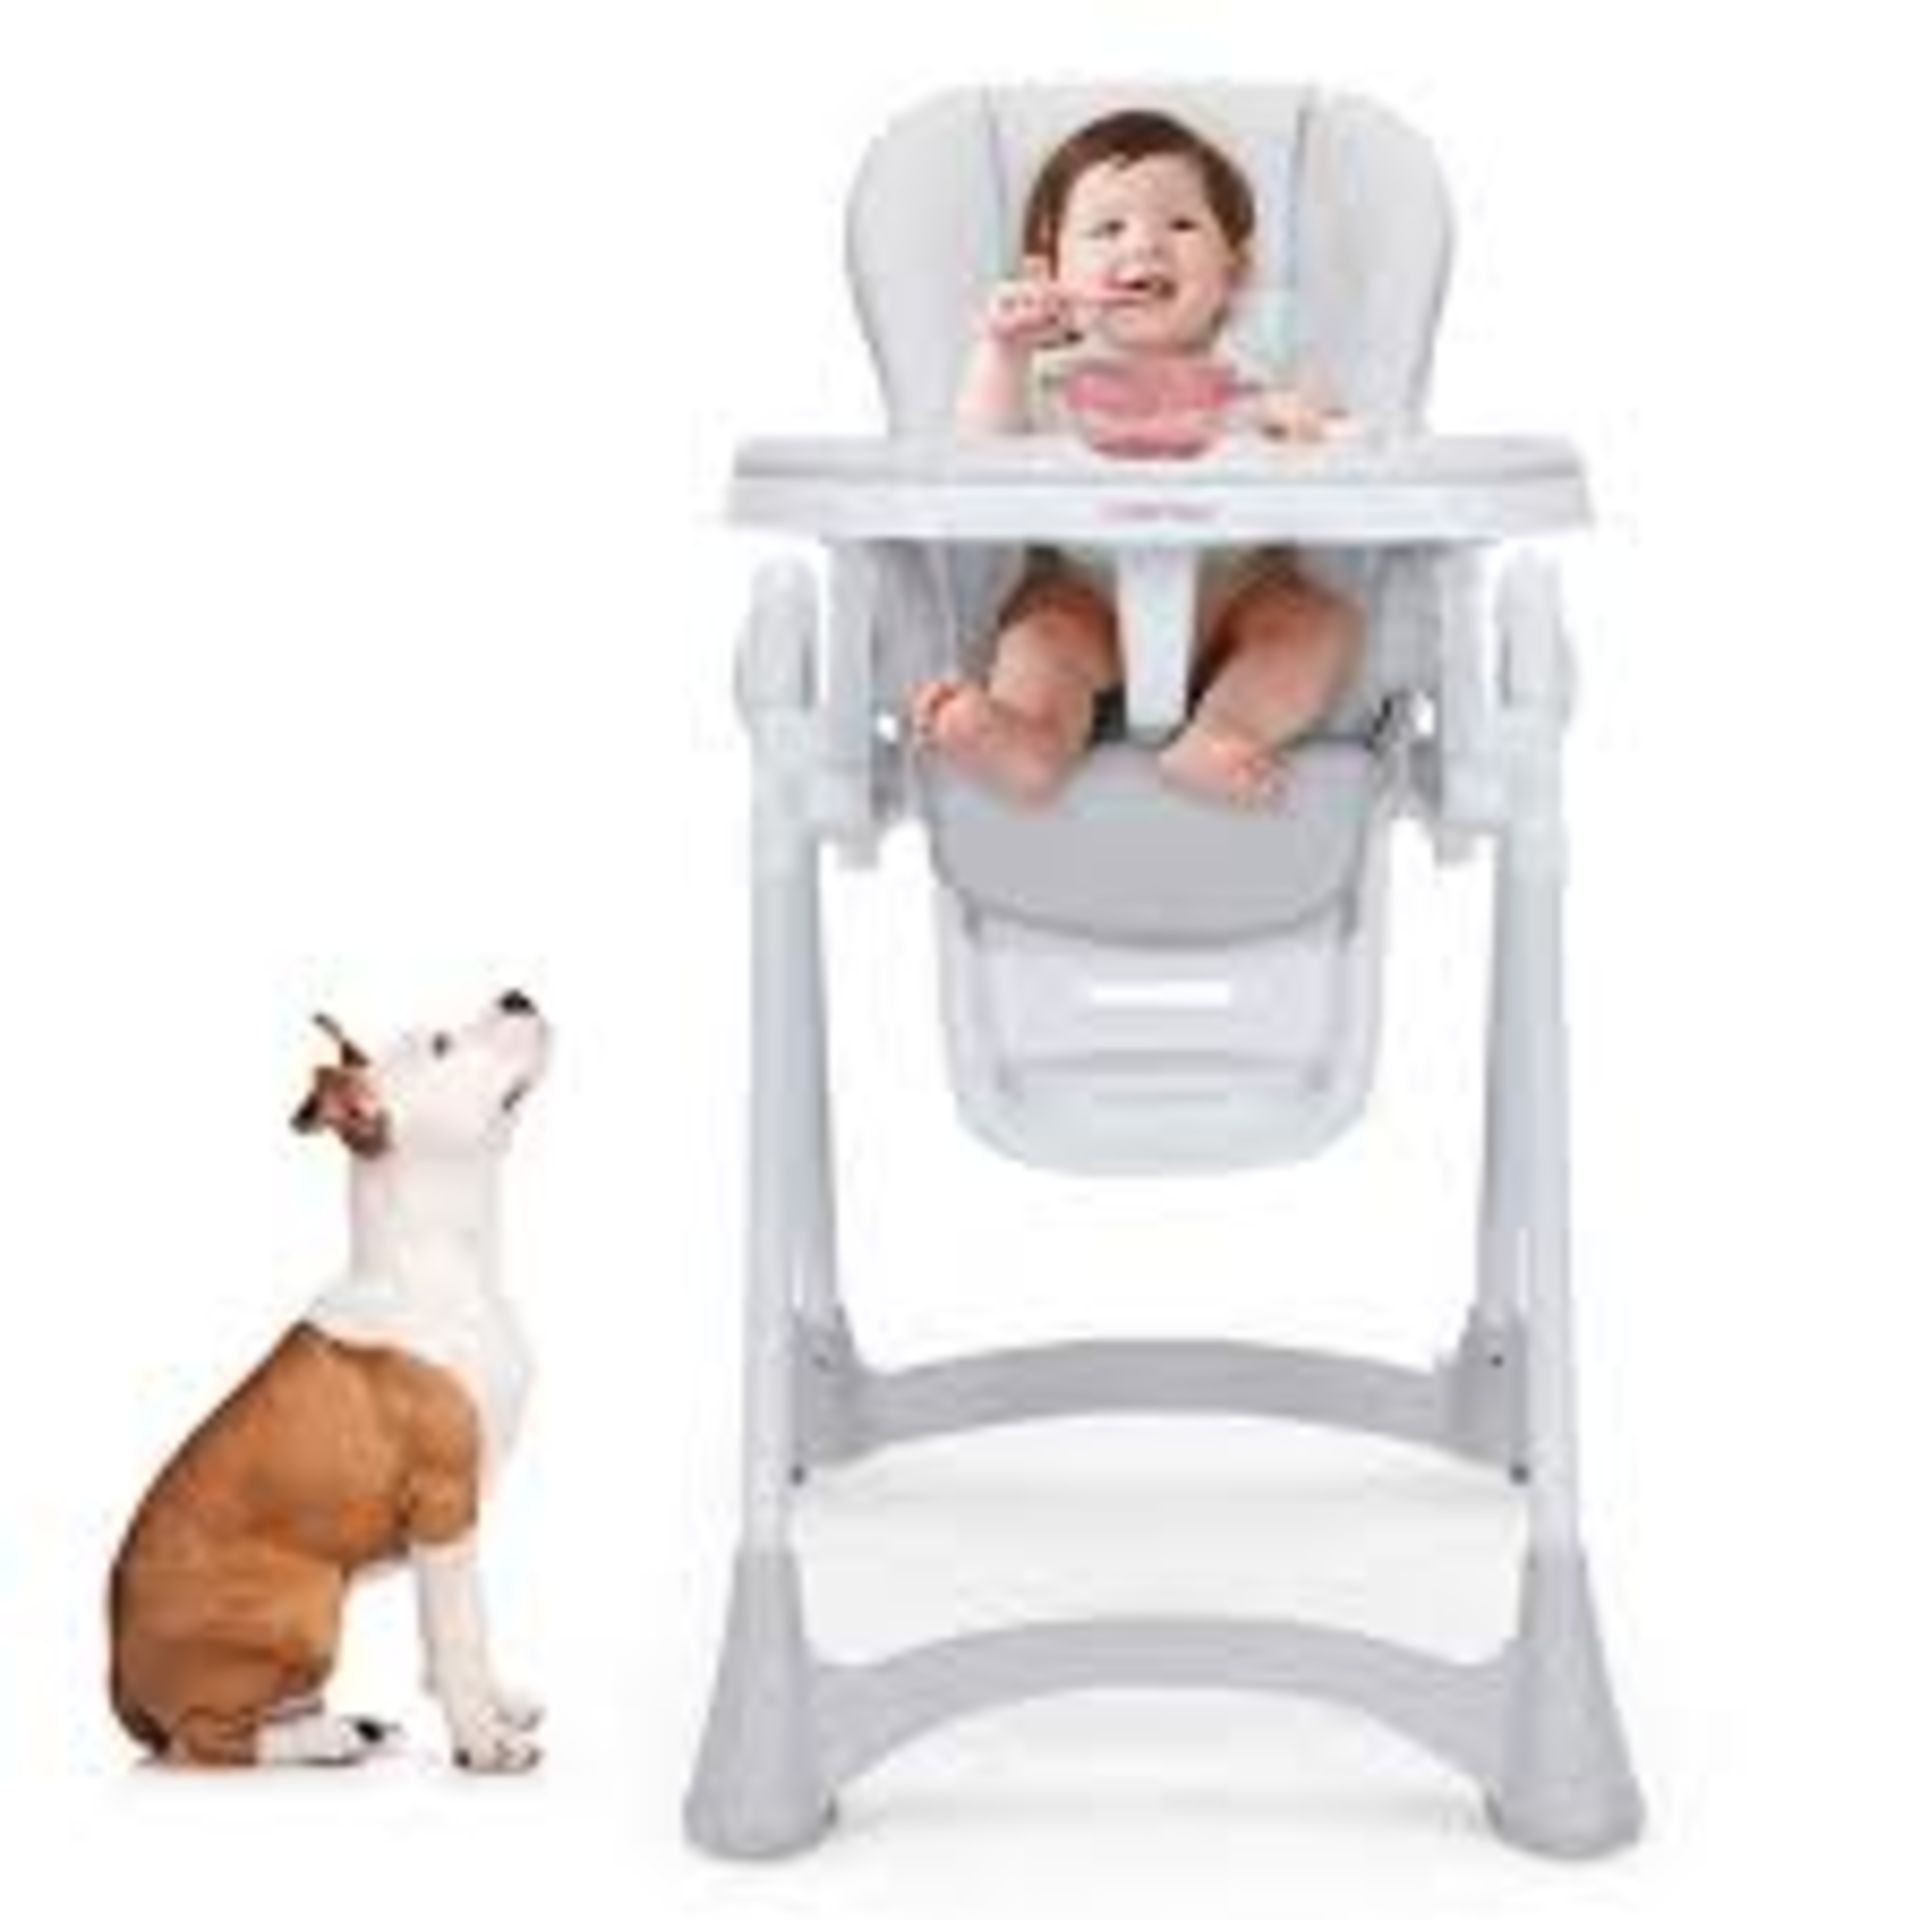 Height Adjustable Folding Highchair for Baby Toddler. - R13a.13. This adjustable baby highchair